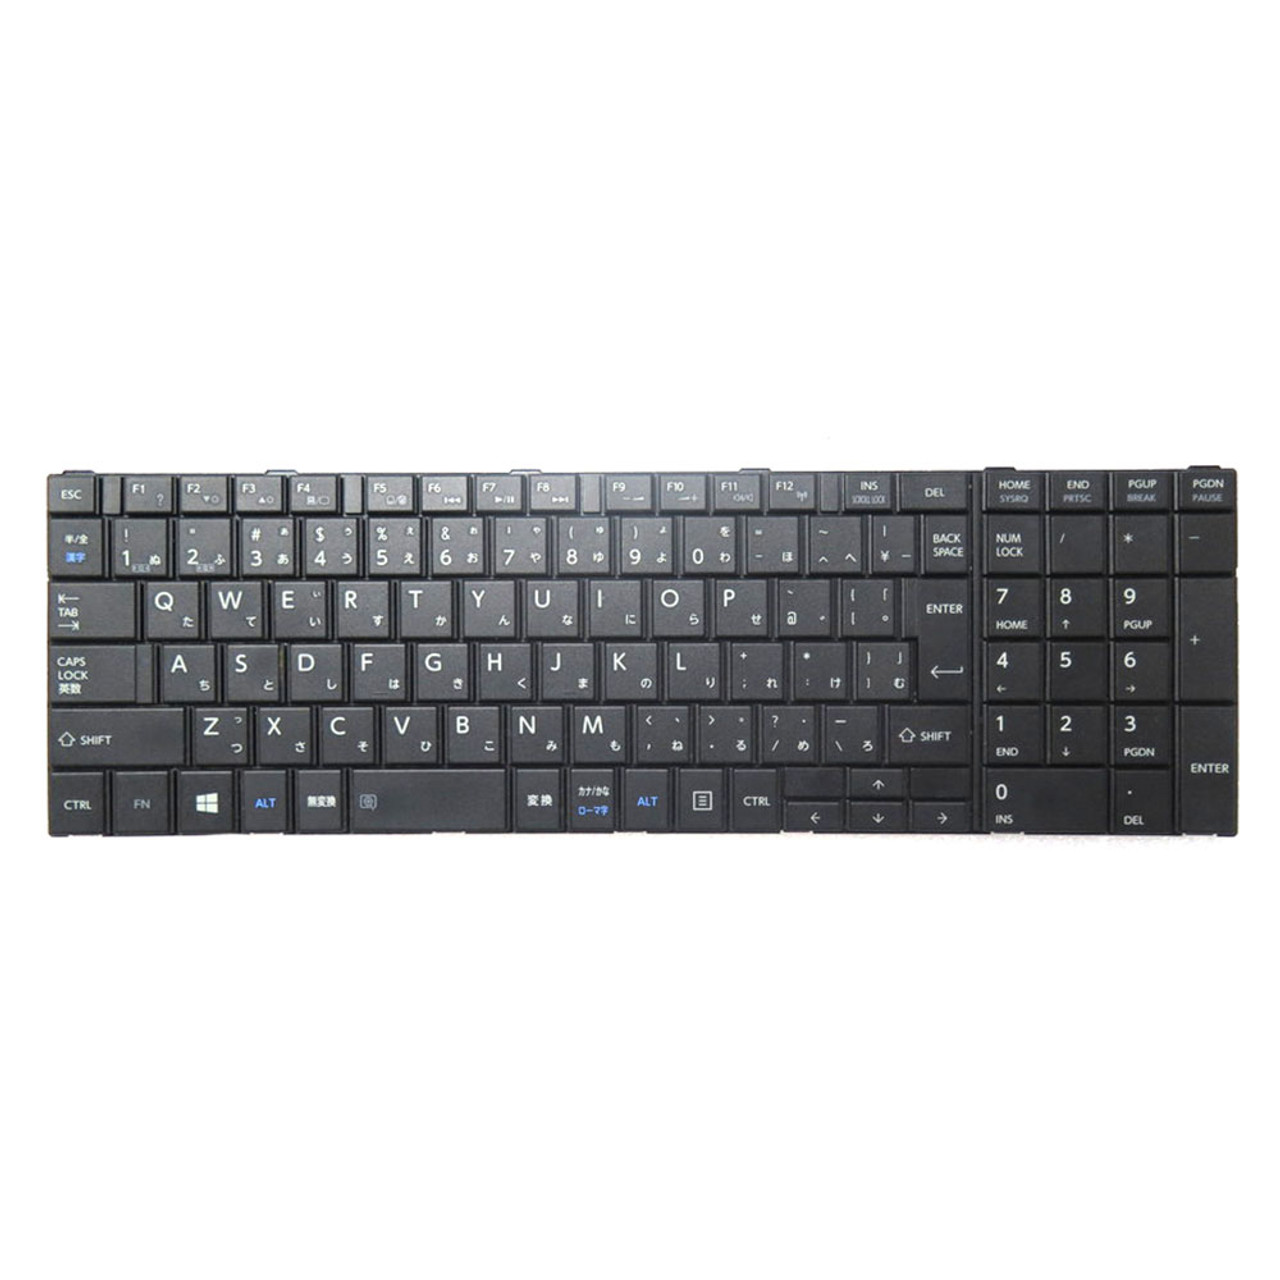 Laptop Keyboard For Toshiba Dynabook T554/45L T554/56L T554/76L T554/76LB  T554/76LBS T554/76LG T554/76LGS T554/76LR T554/76LRS T554/76LW T554/76LWS 